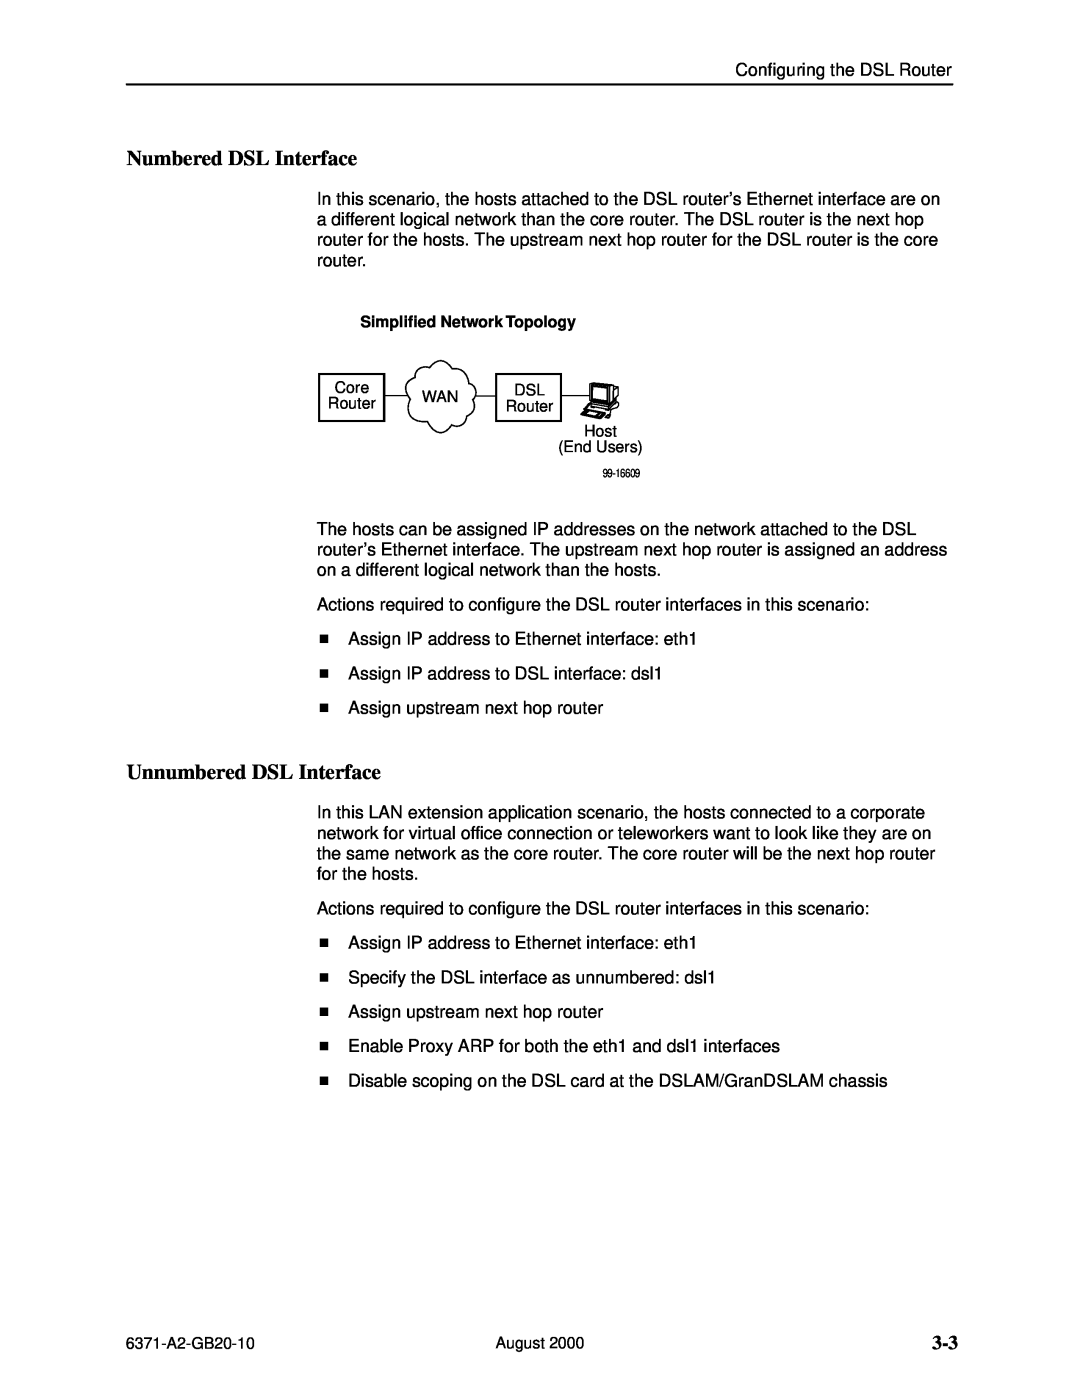 Paradyne Routers manual Numbered DSL Interface, Unnumbered DSL Interface, Simplified Network Topology 